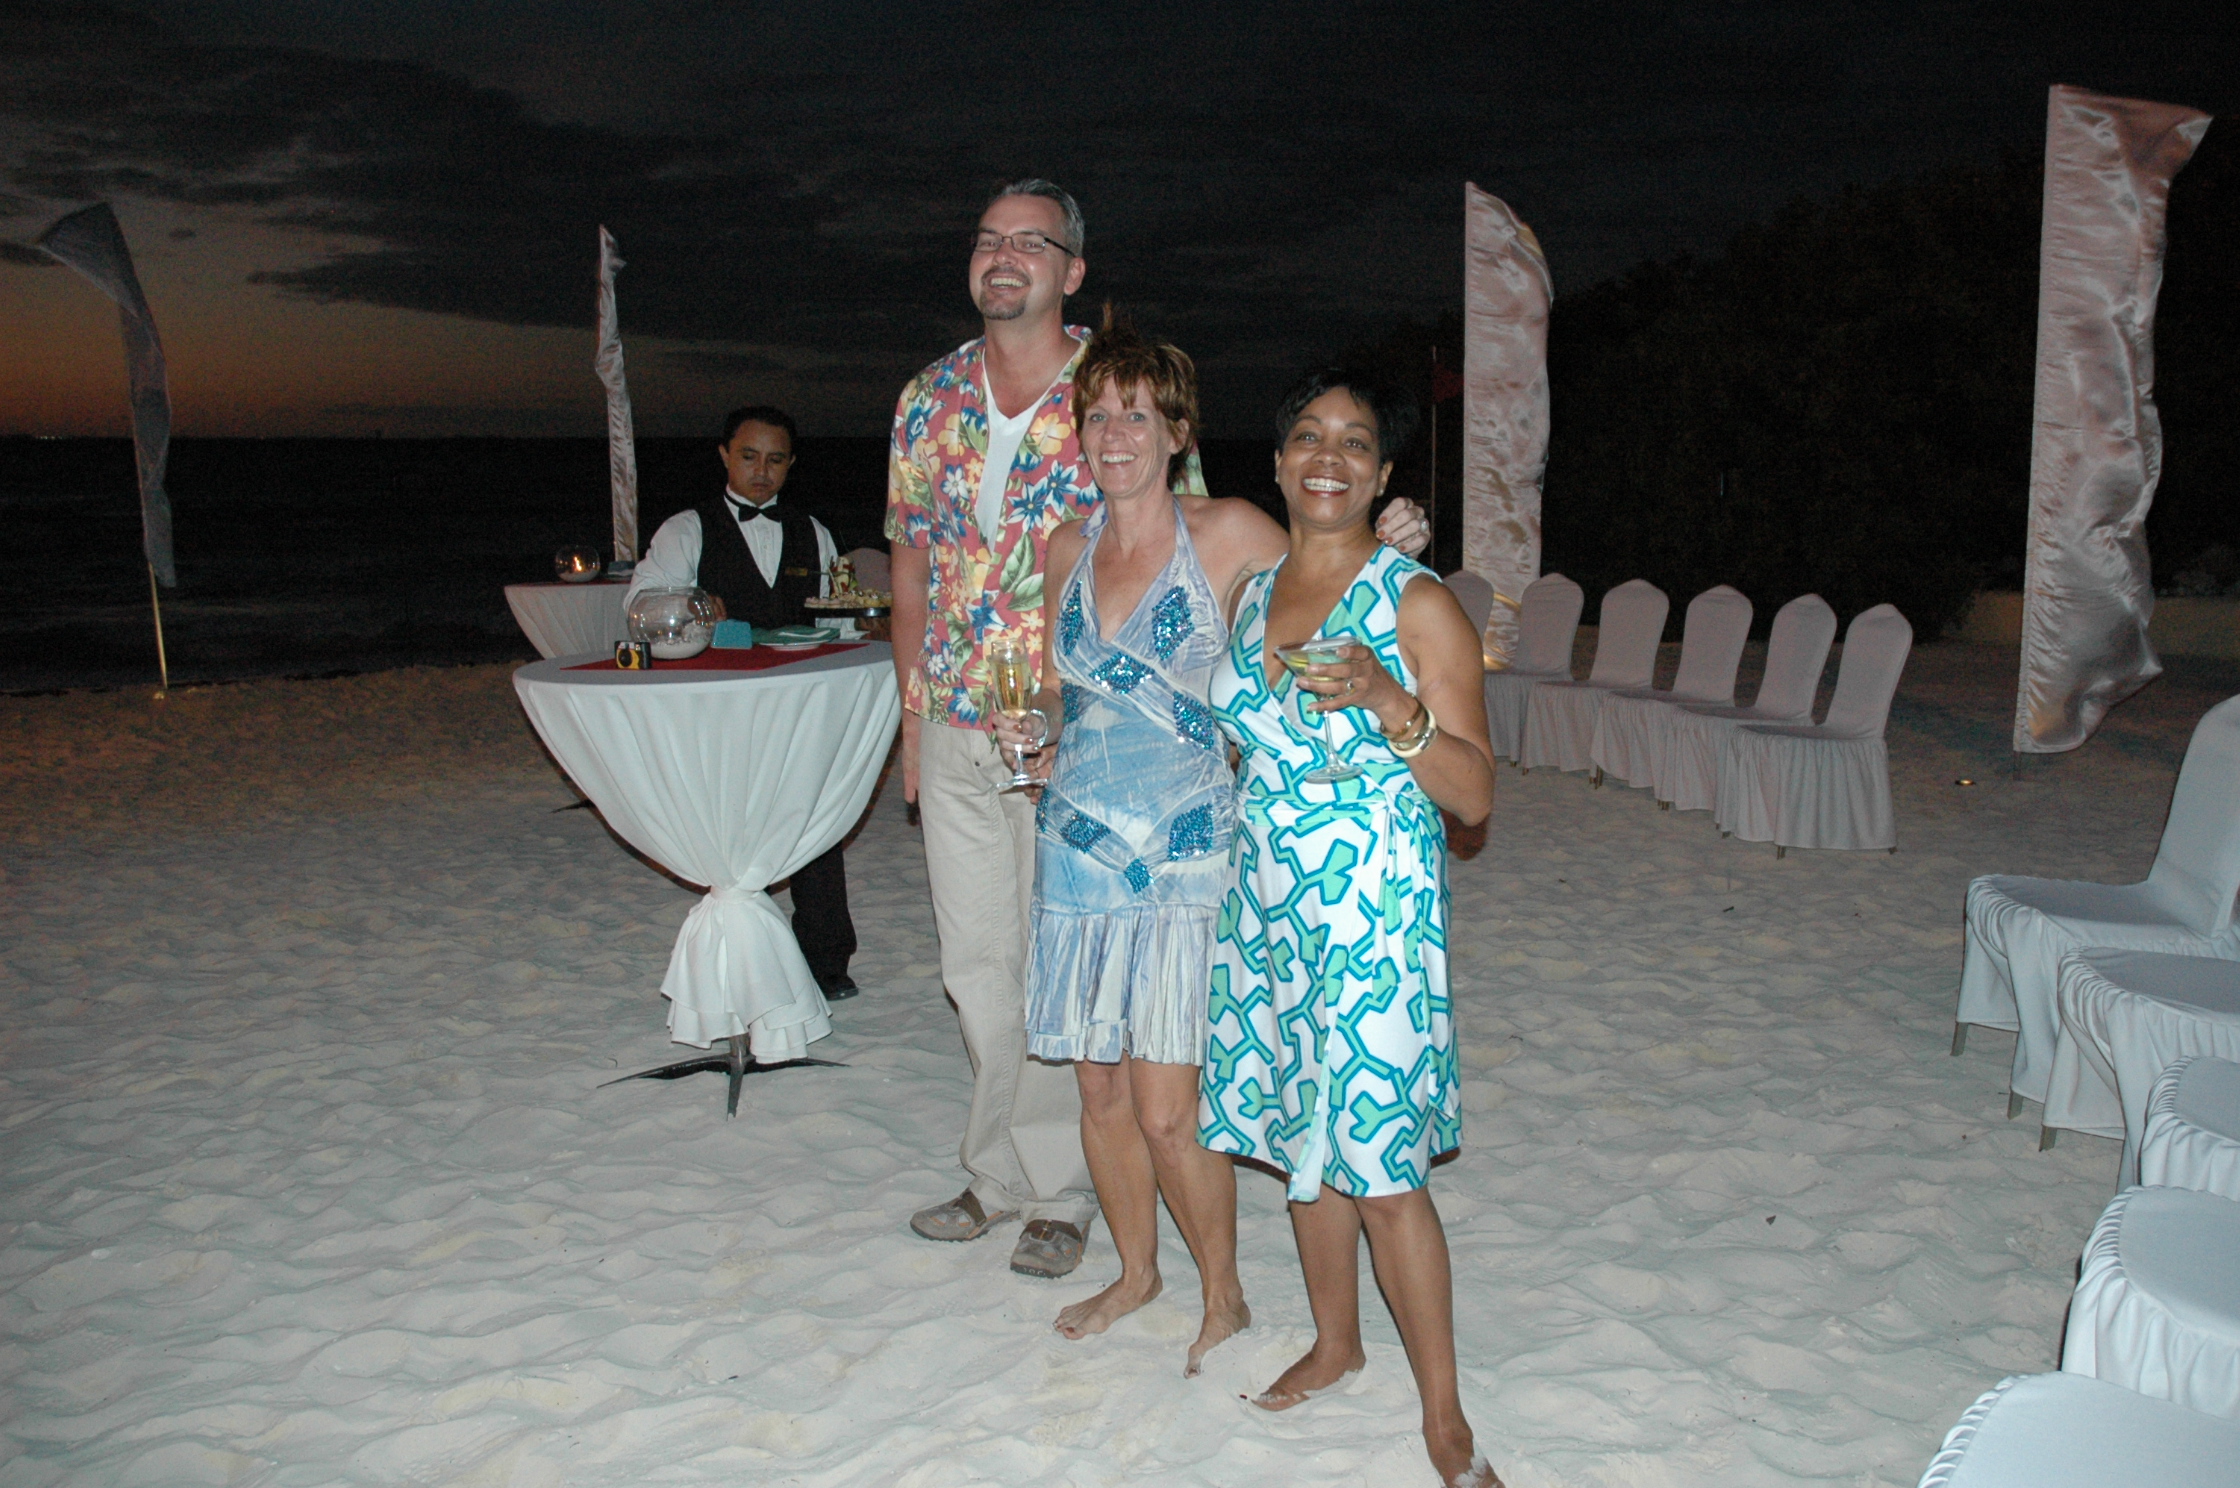 Tim, Jytte, and Jackie model the perfect Cancun party attire.